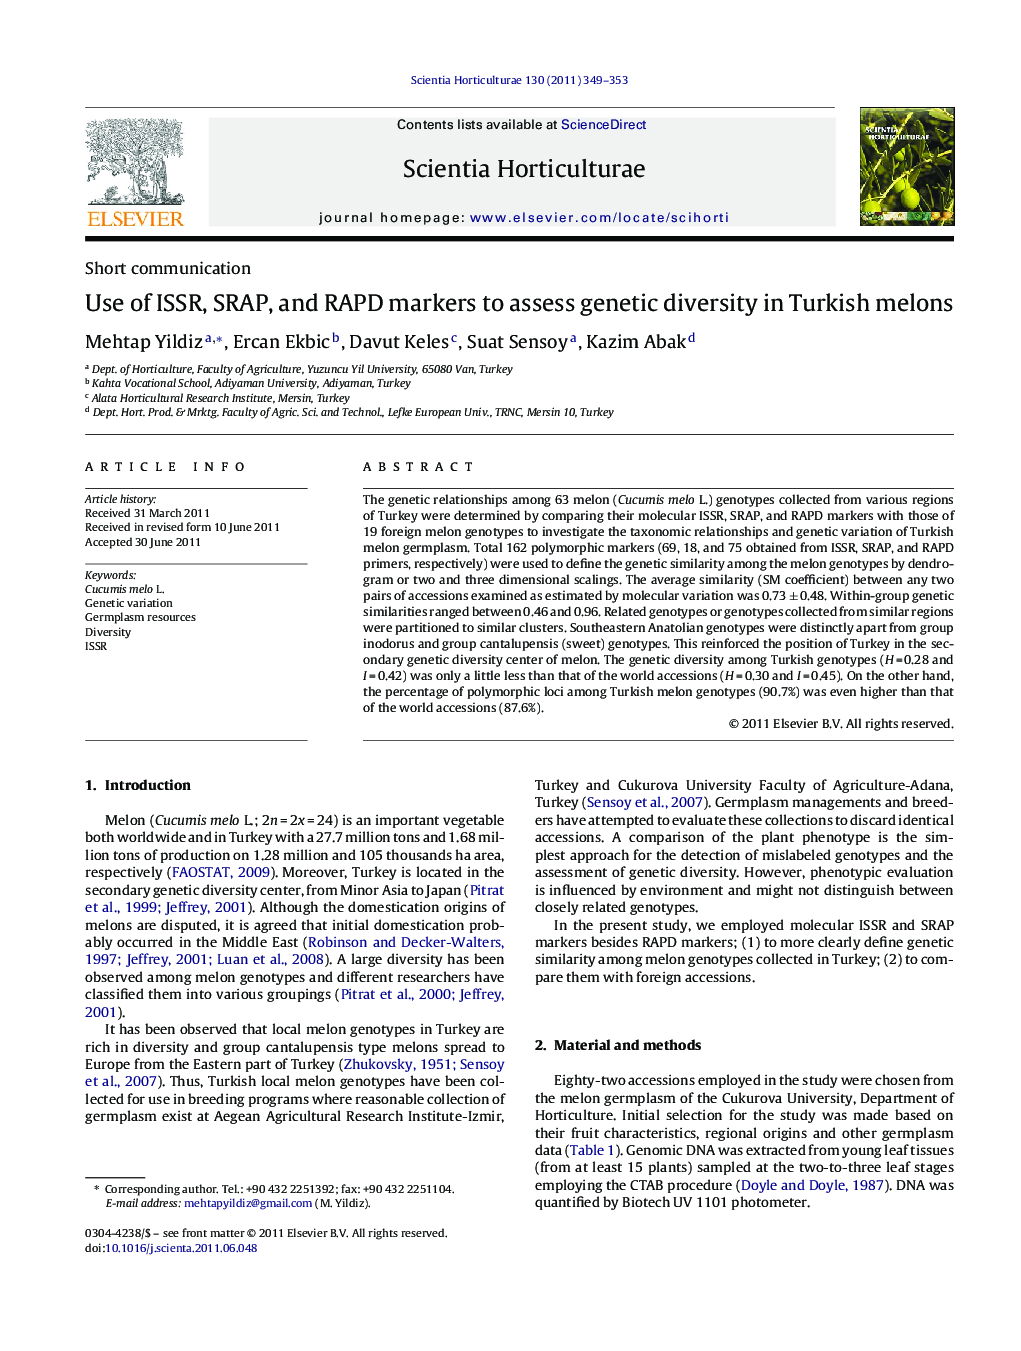 Use of ISSR, SRAP, and RAPD markers to assess genetic diversity in Turkish melons